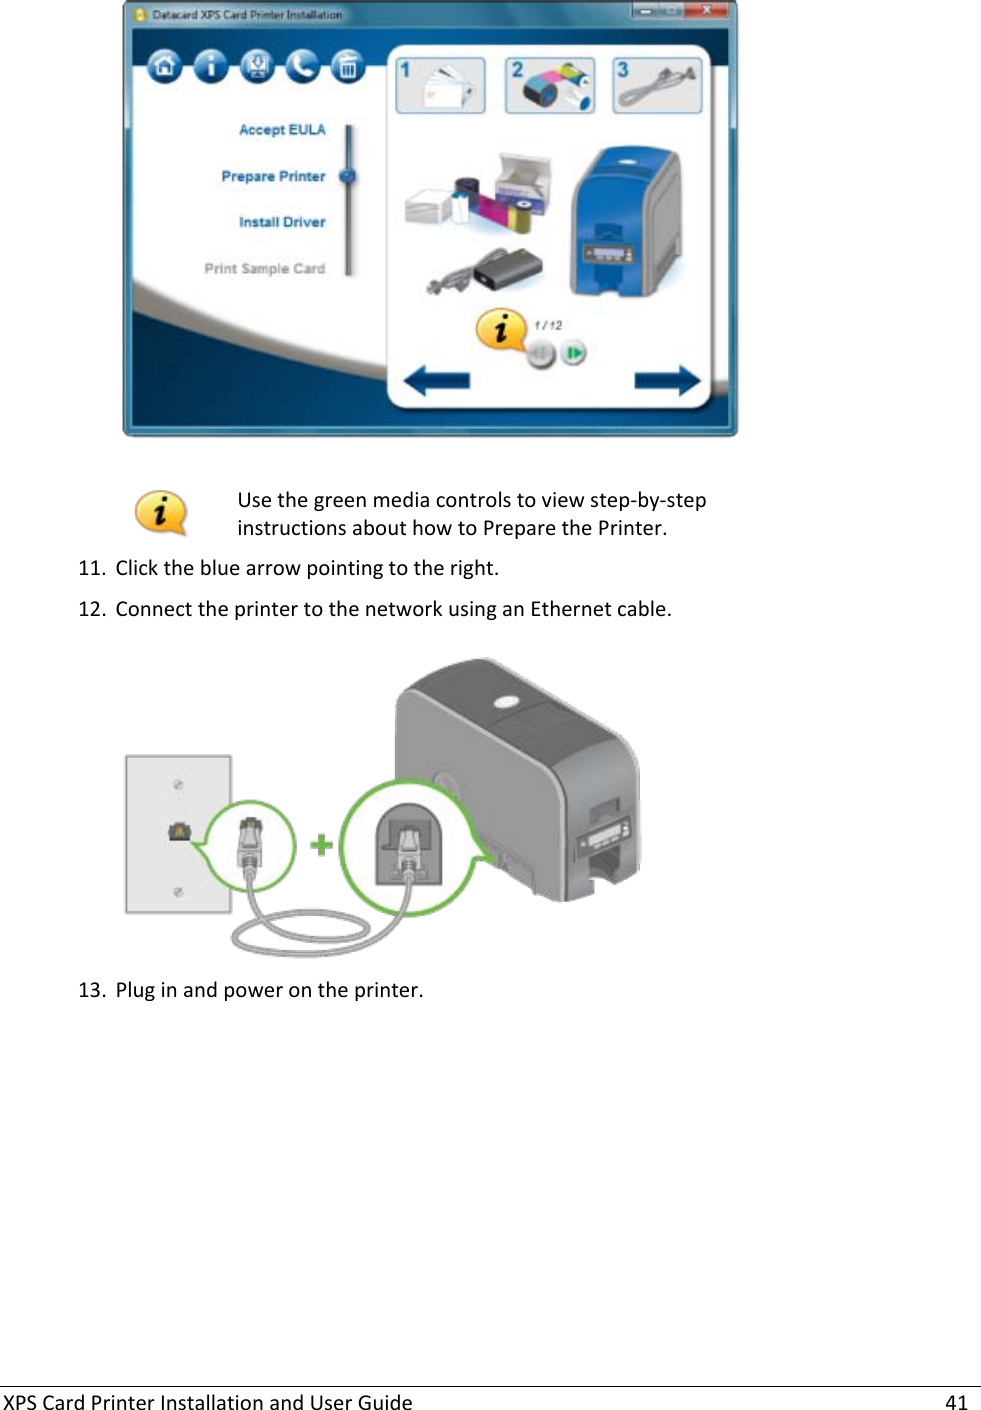 XPS Card Printer Installation and User Guide    41    Use the green media controls to view step-by-step instructions about how to Prepare the Printer. 11. Click the blue arrow pointing to the right.  12. Connect the printer to the network using an Ethernet cable.   13. Plug in and power on the printer.  